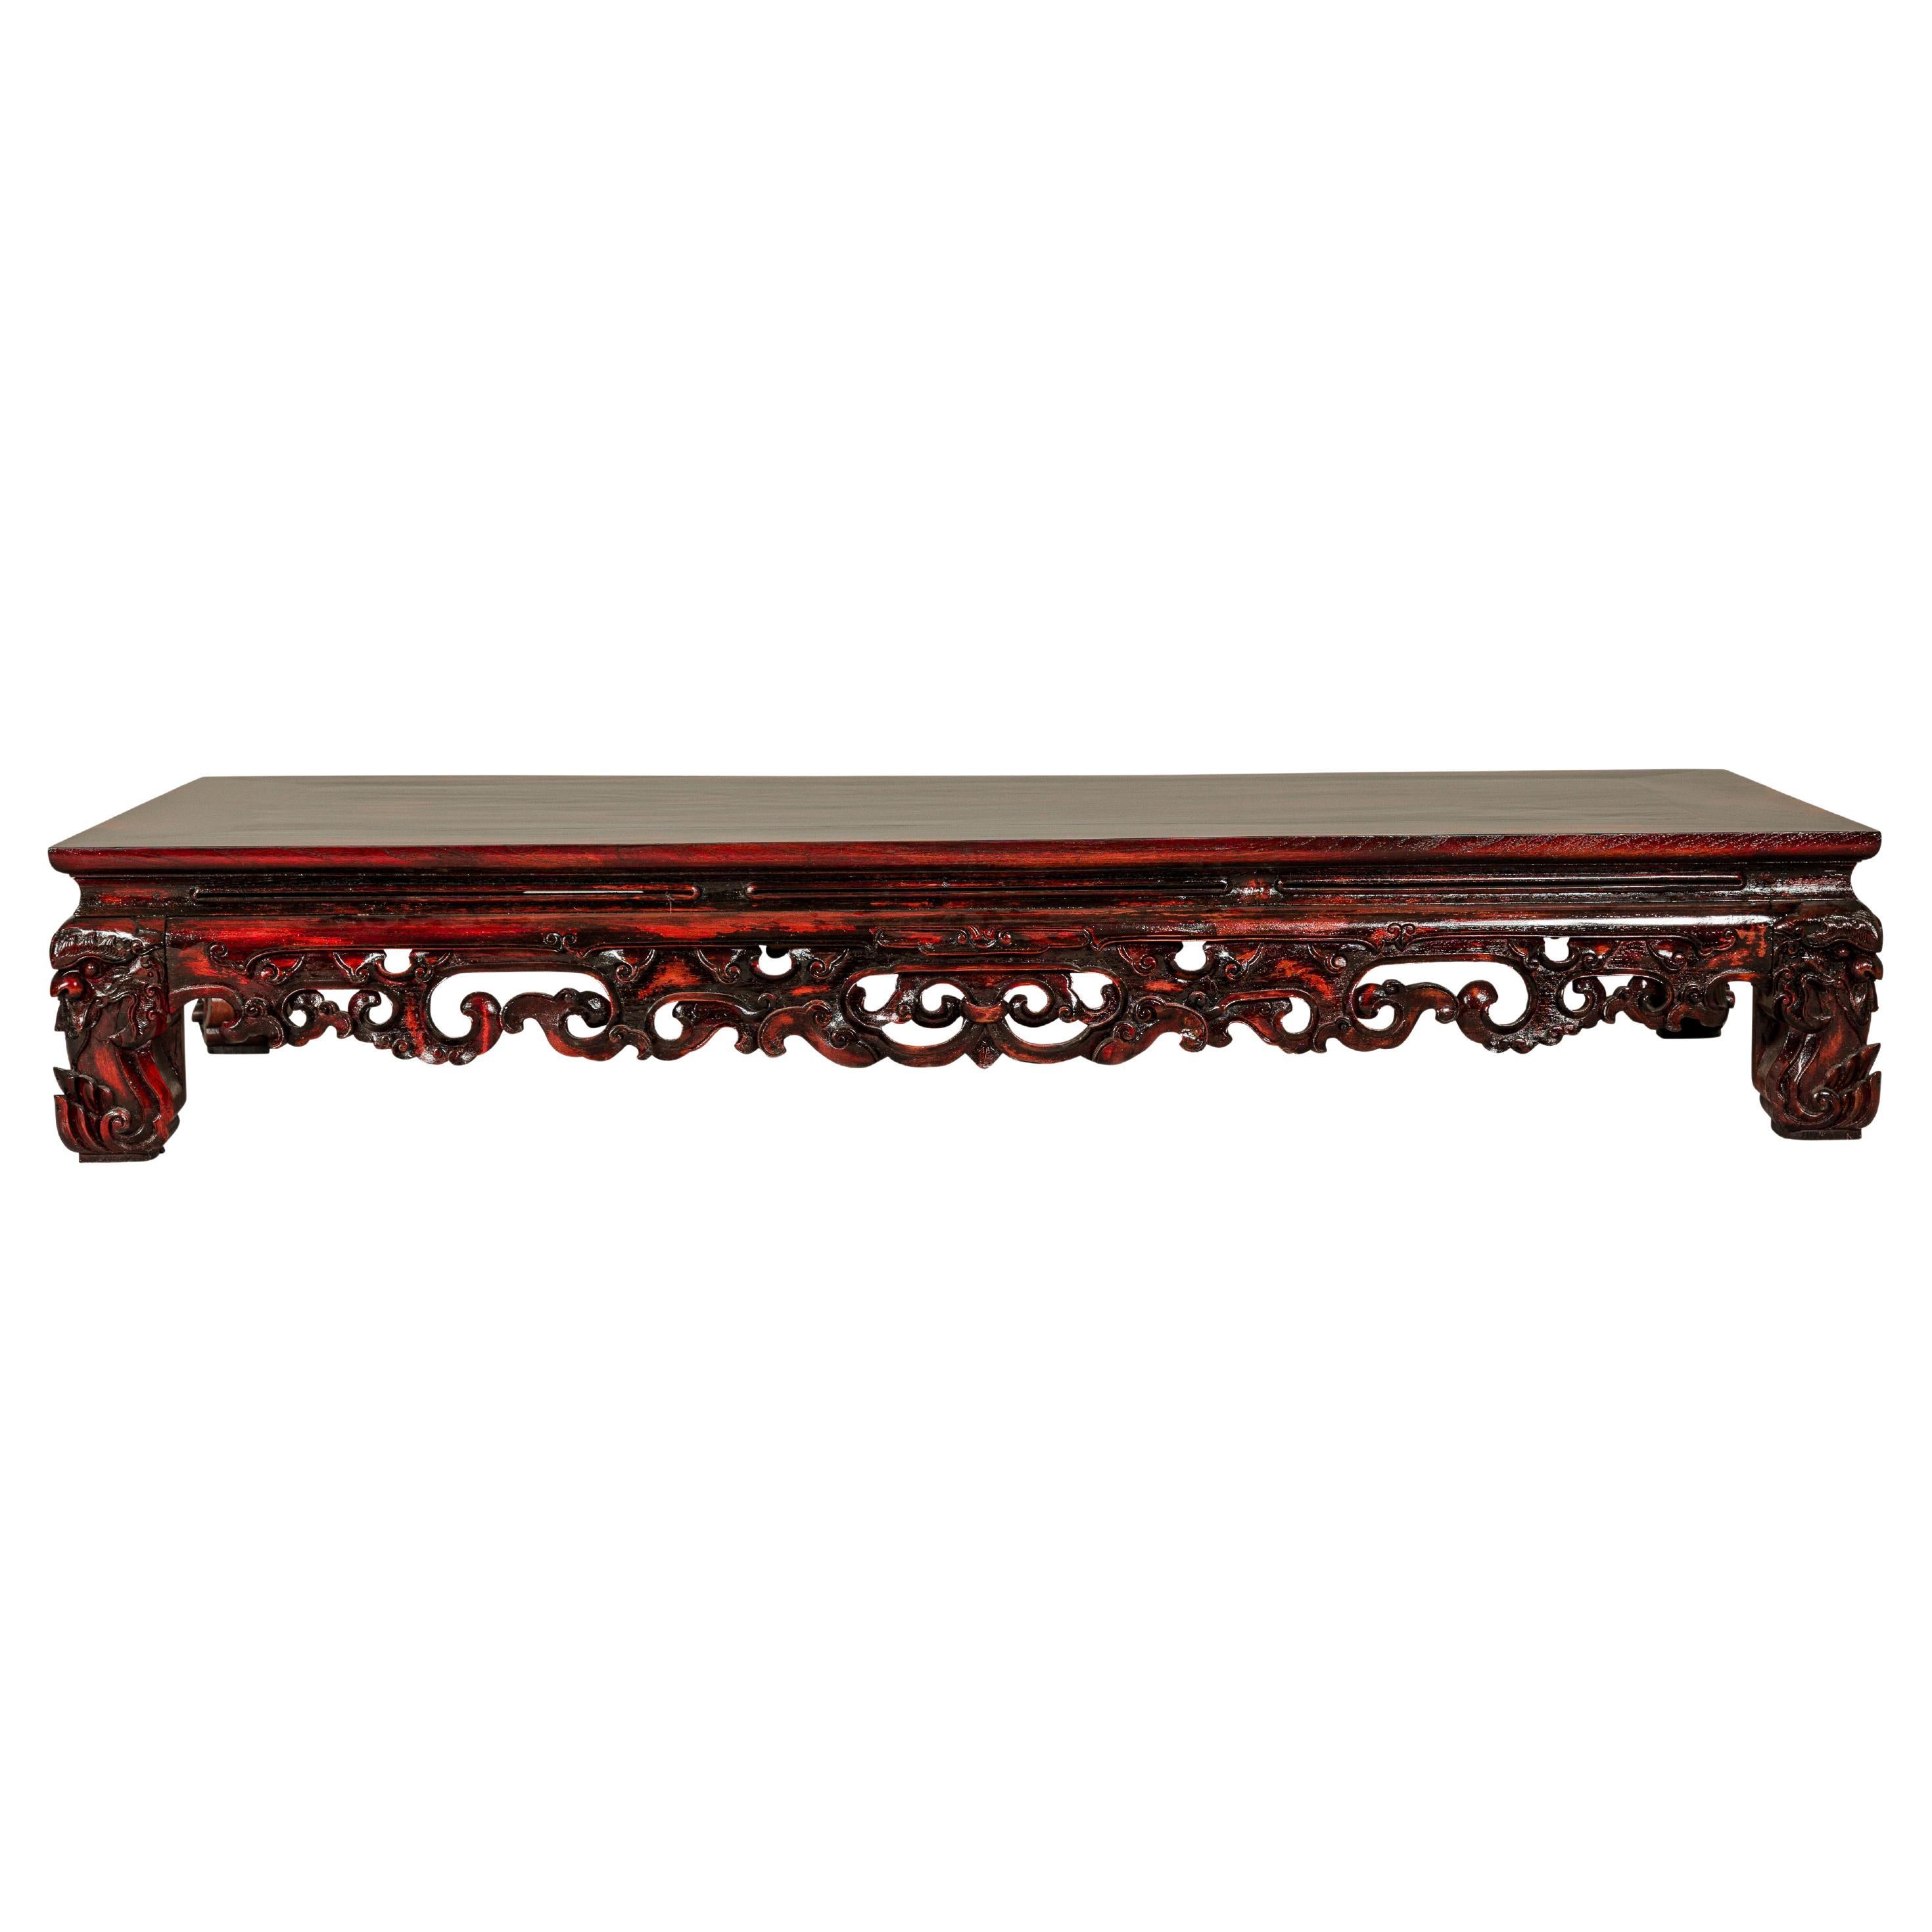 Qing Dynasty Low Kang Coffee Table with Reddish Brown Finish and Carved Décor For Sale